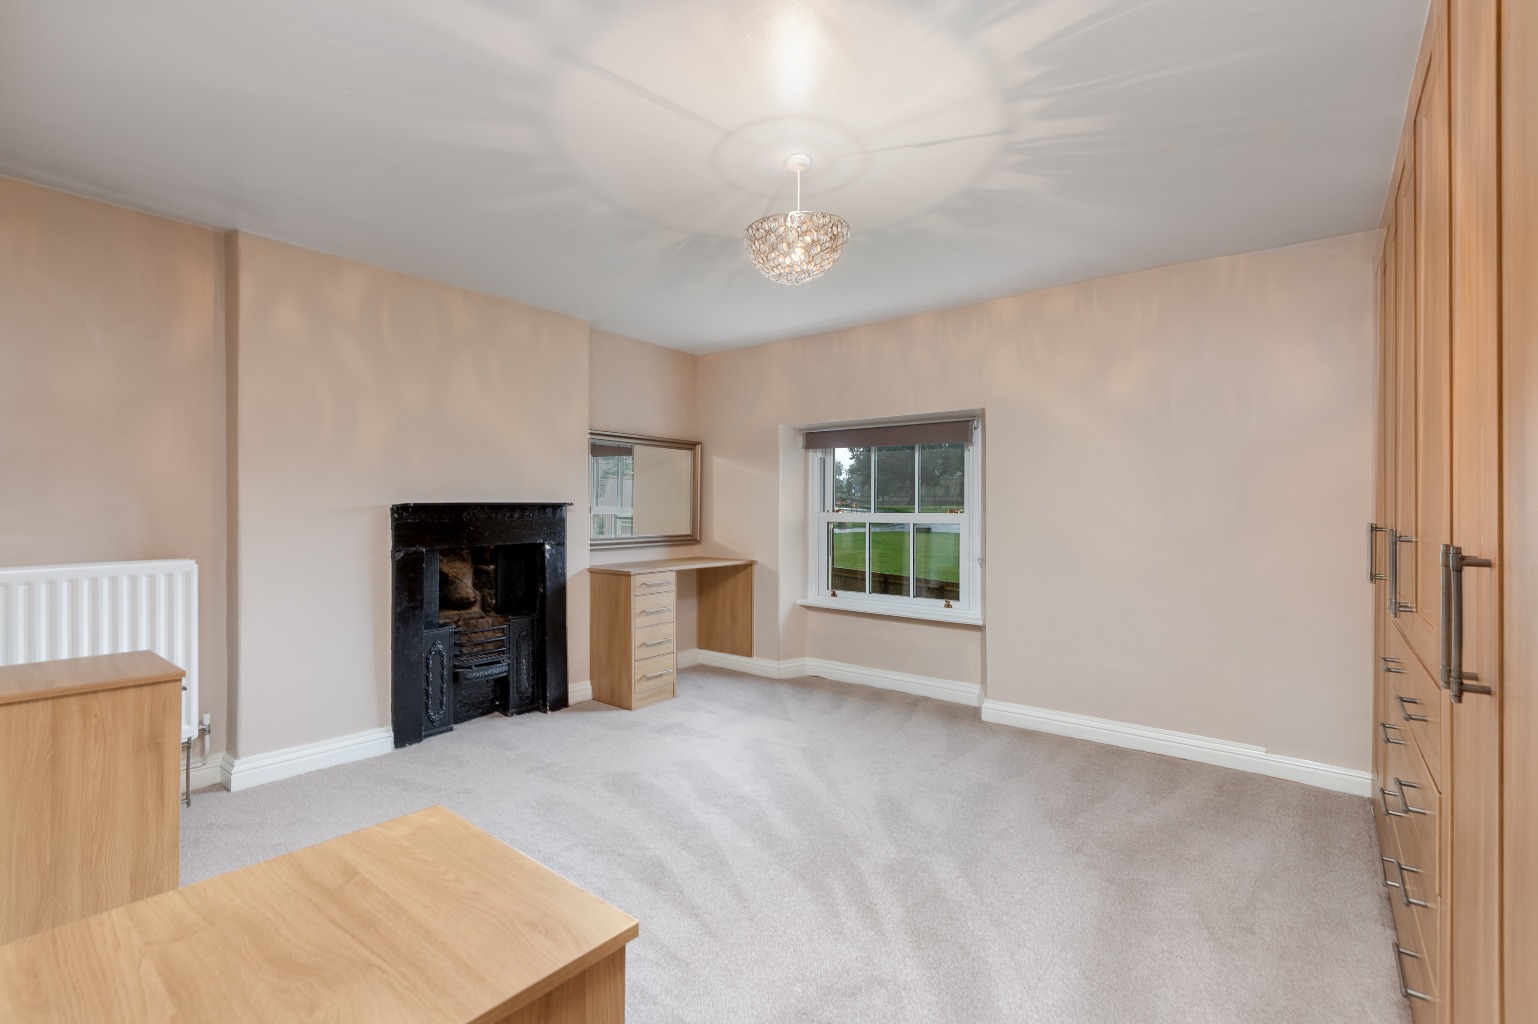 3 bed detached house to rent, Catterick Garrison  - Property Image 6